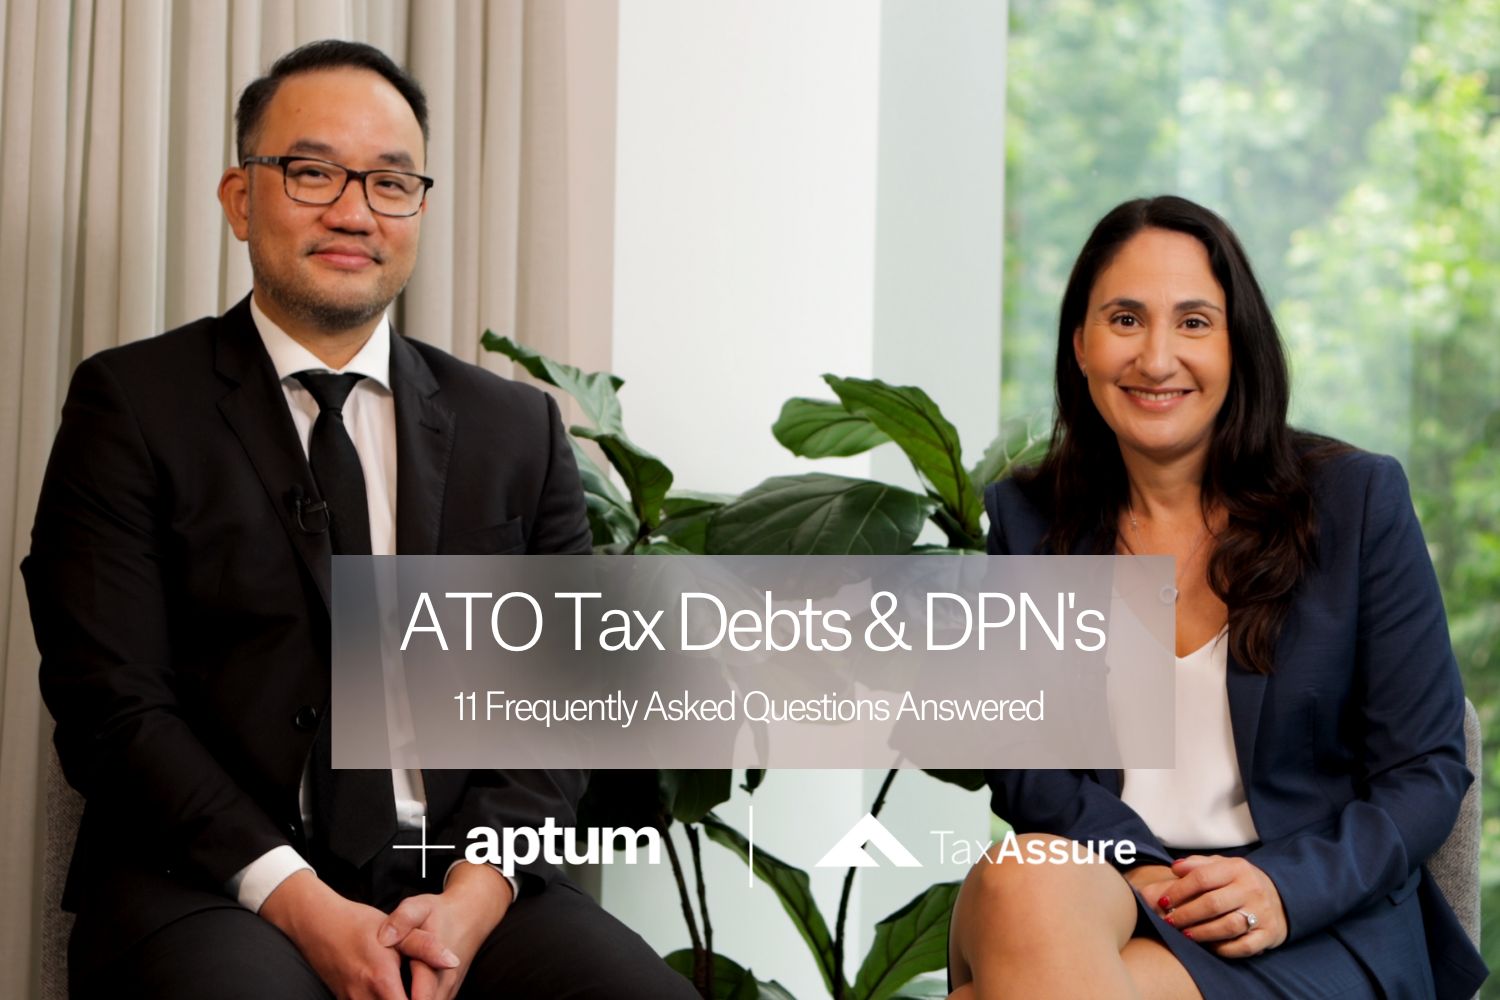 Tuan Van Le of Aptum (left) sits beside Olga Koskie of Tax Assure (right) with text overalying 'ato tax debts & dpn's - 11 frequently asked questions answered'